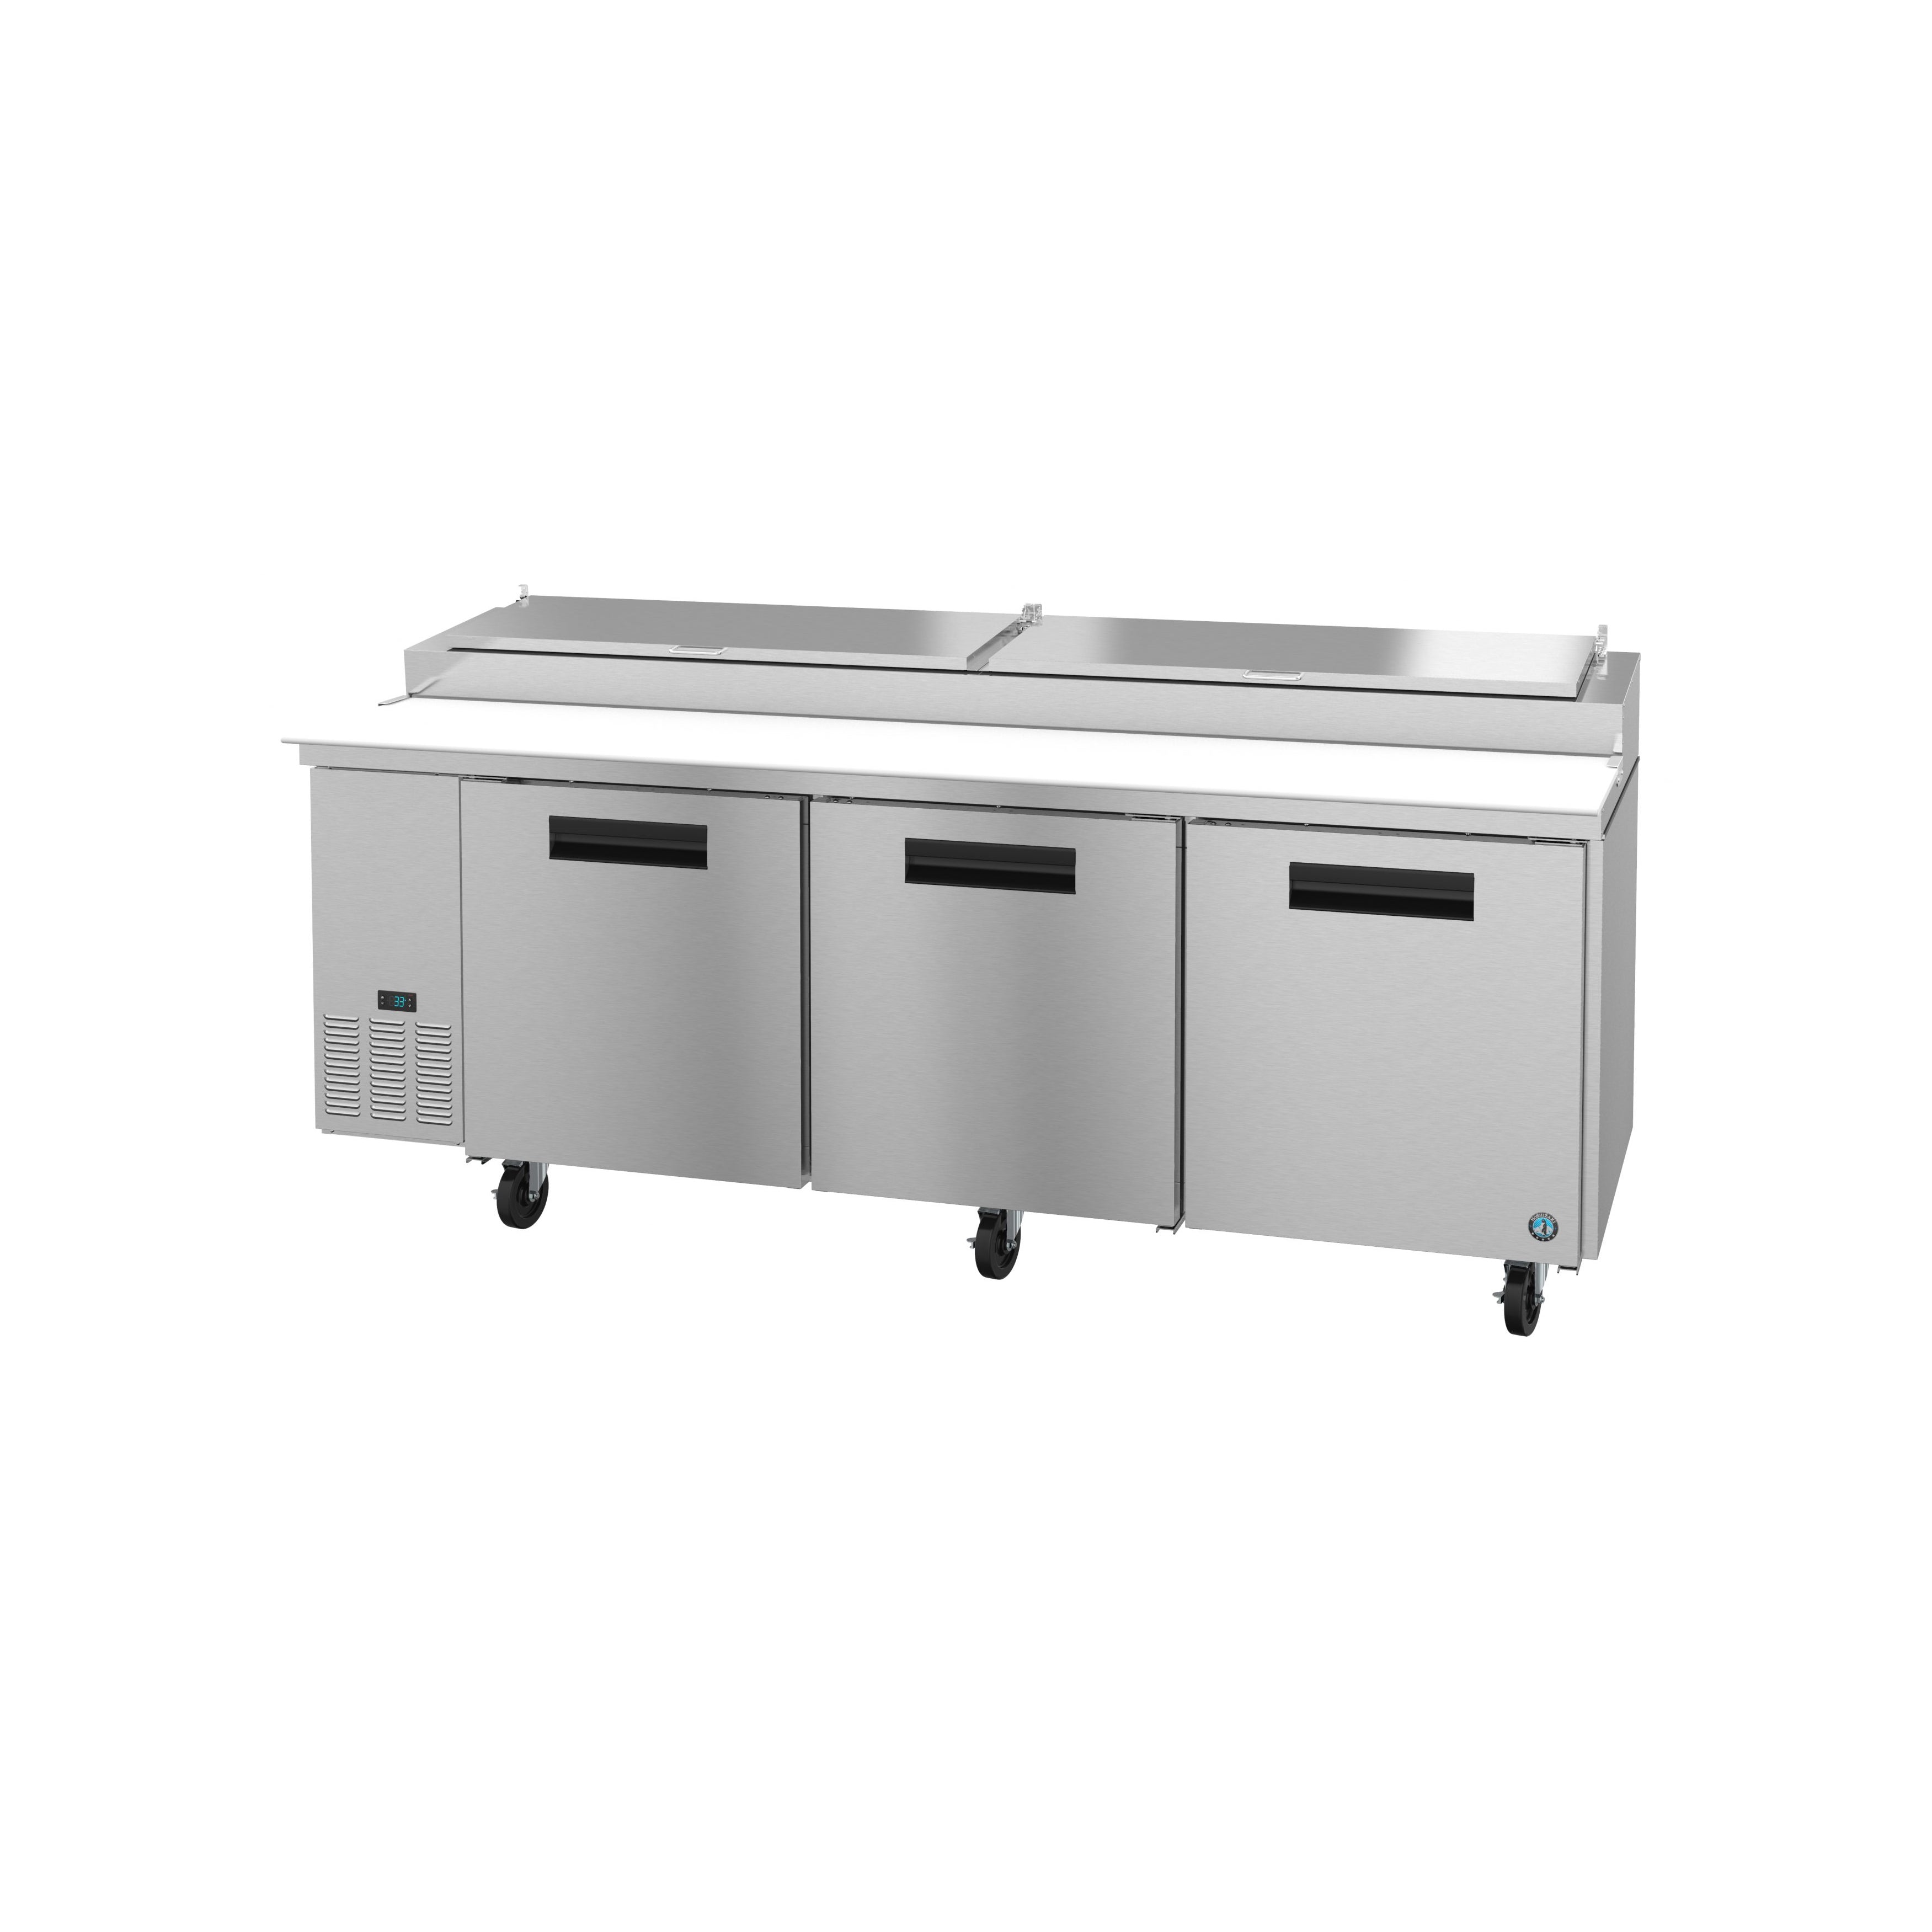 Hoshizaki - PR93A, Commercial 93" Three Section Pizza Prep Table Refrigerator Stainless Doors 30cu.ft.